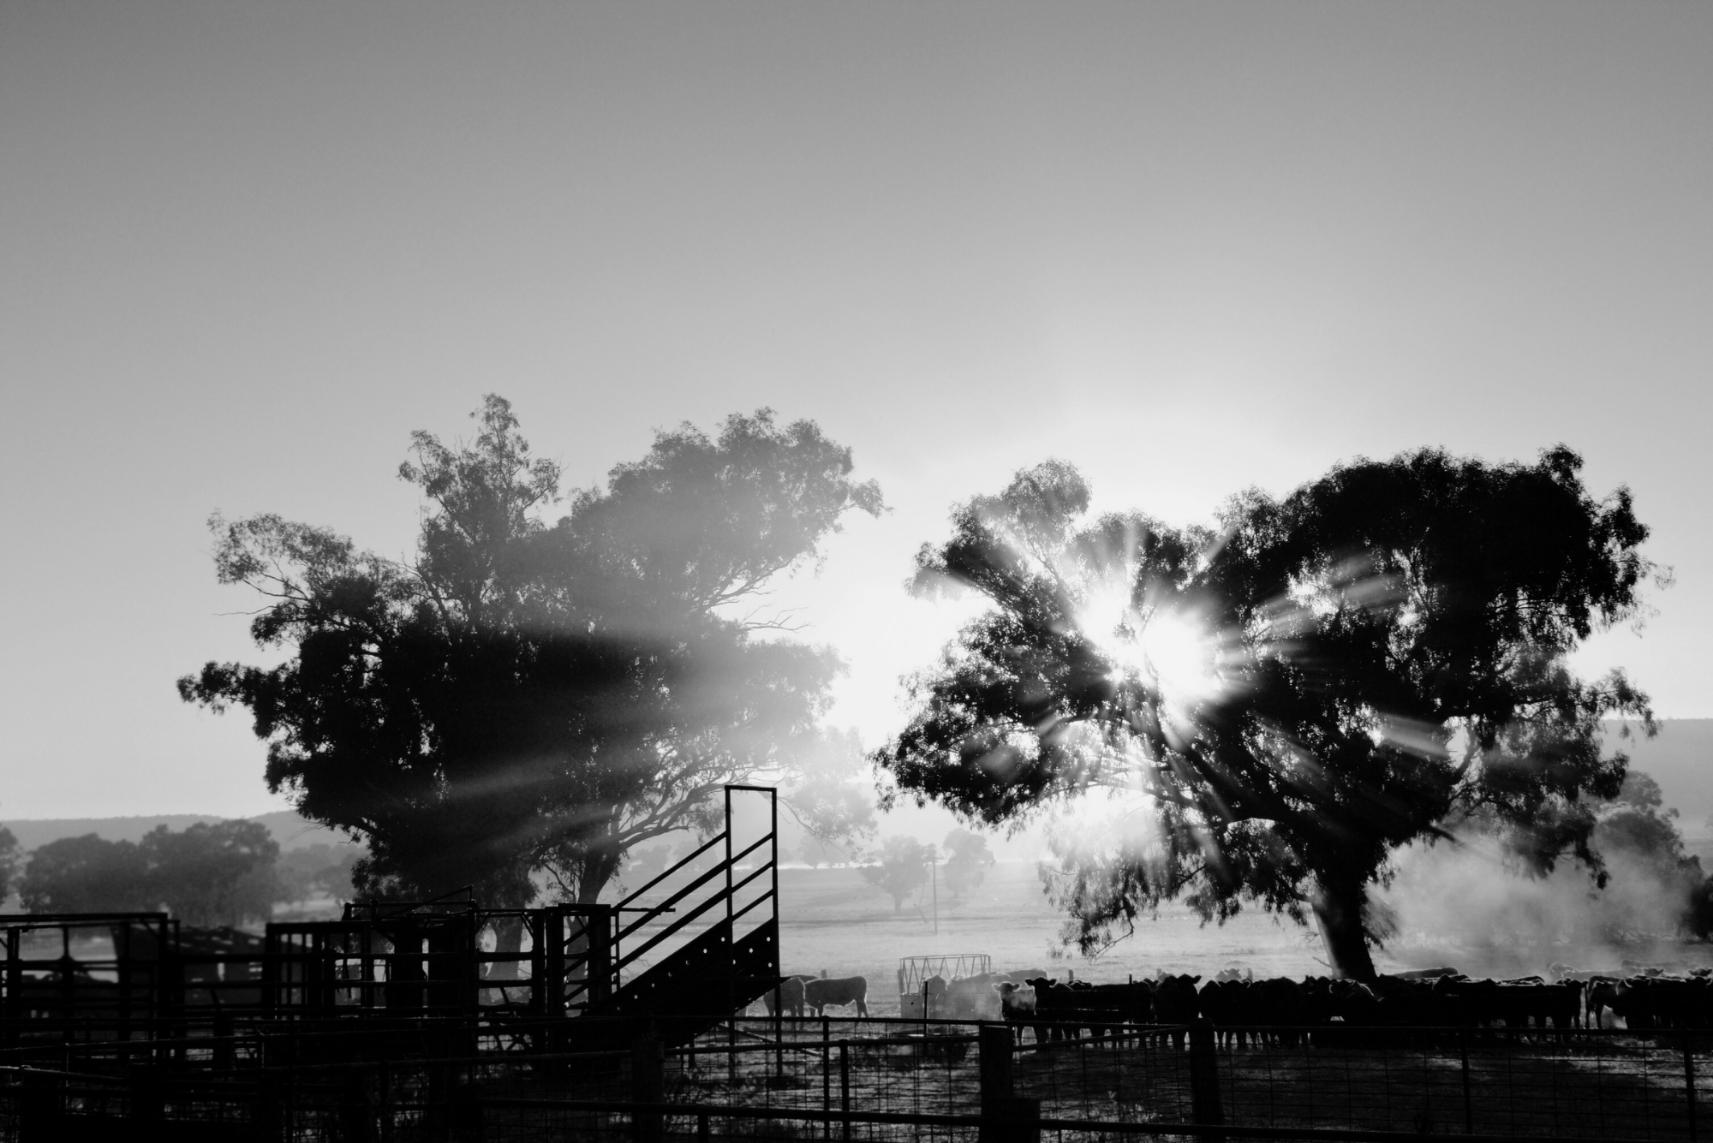 View of cattle yards at sunset